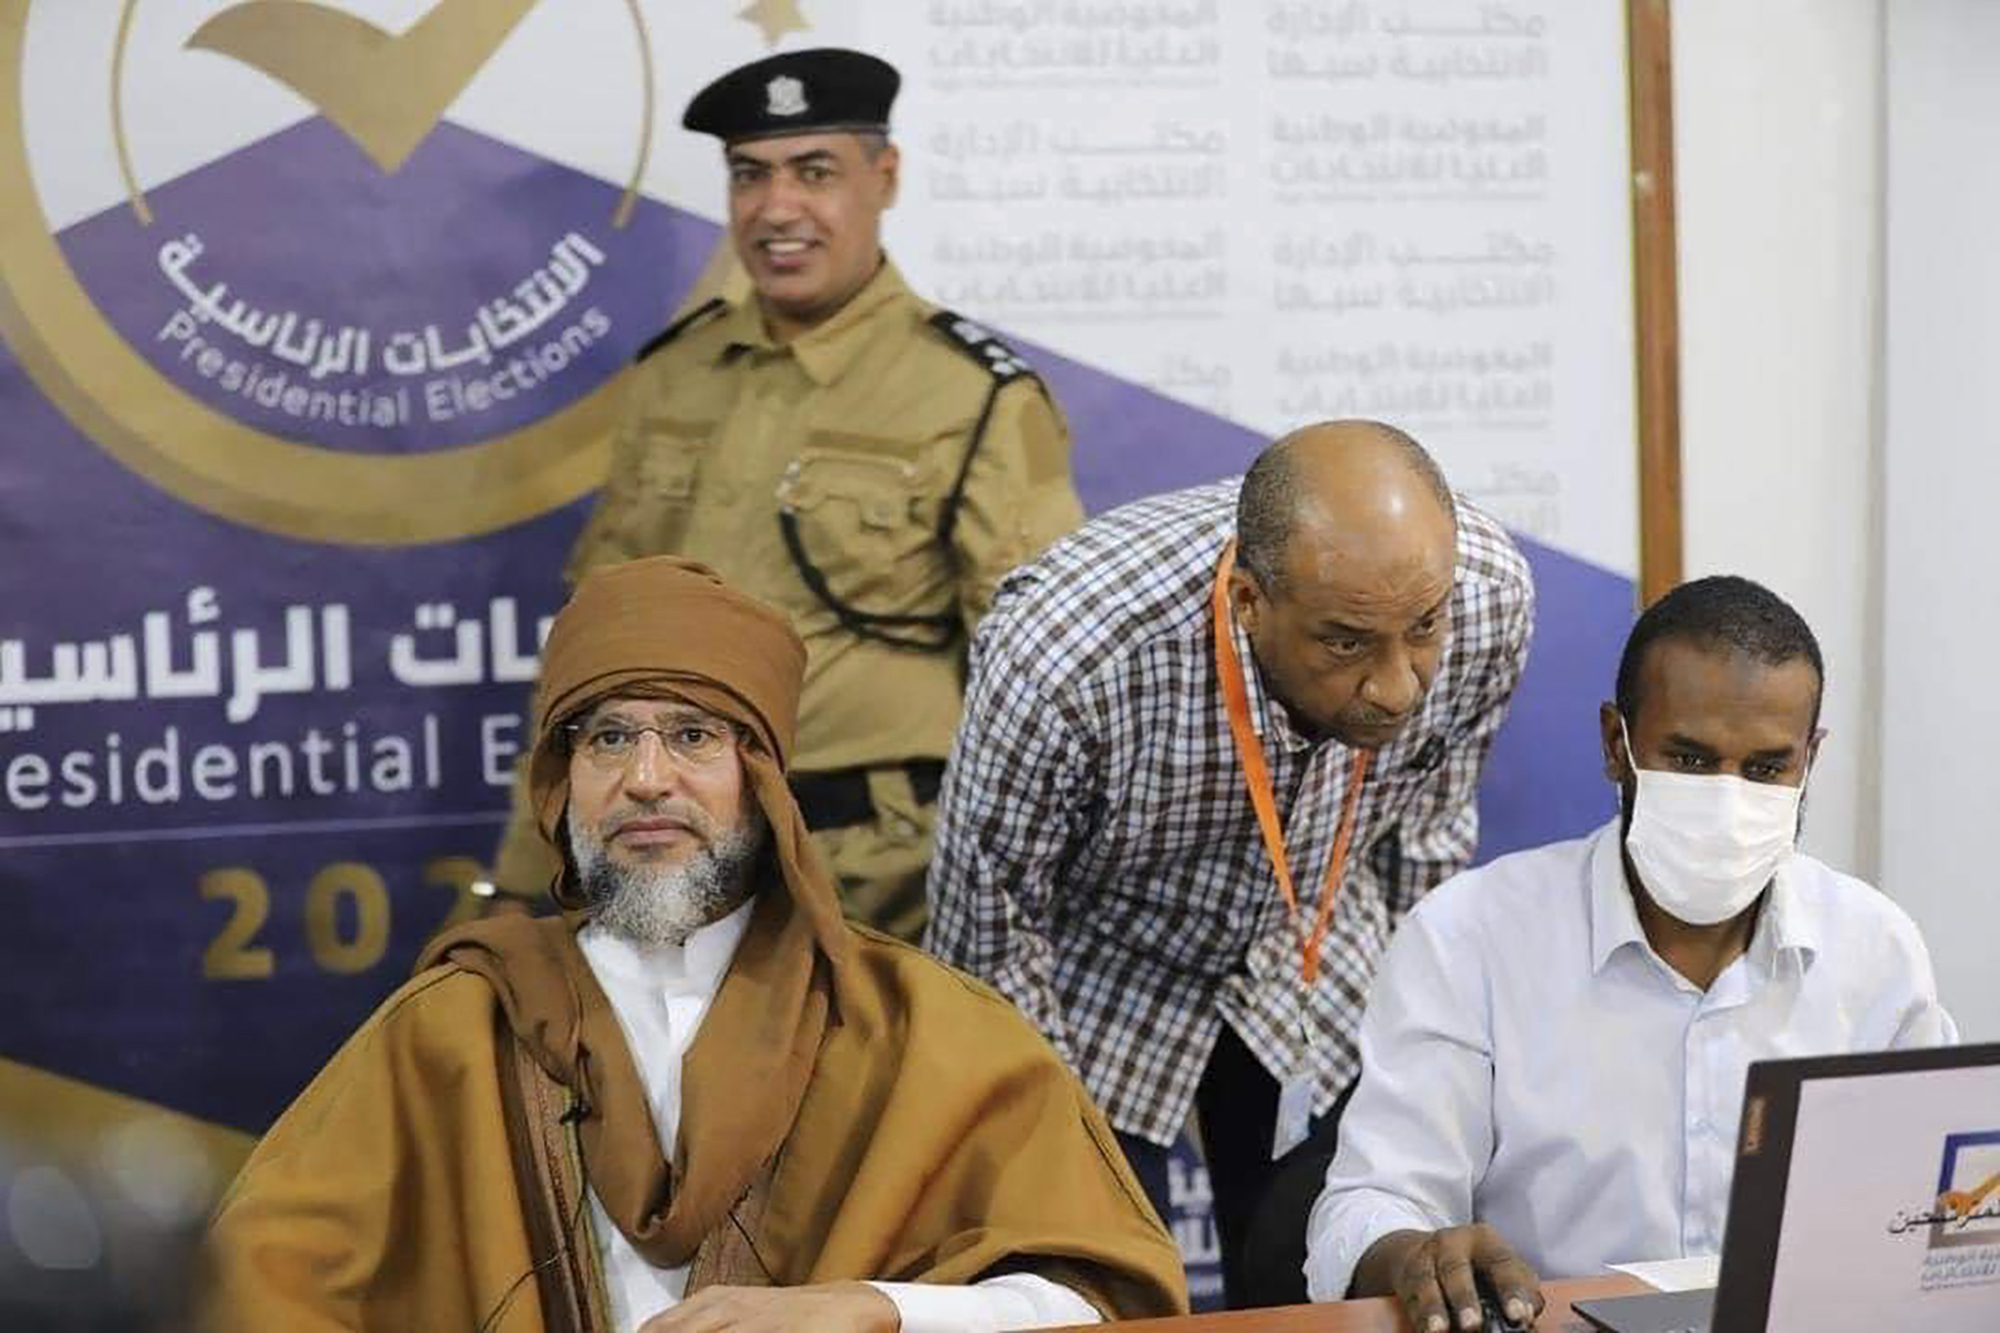 Gadhafi's son announces candidacy for president of Libya